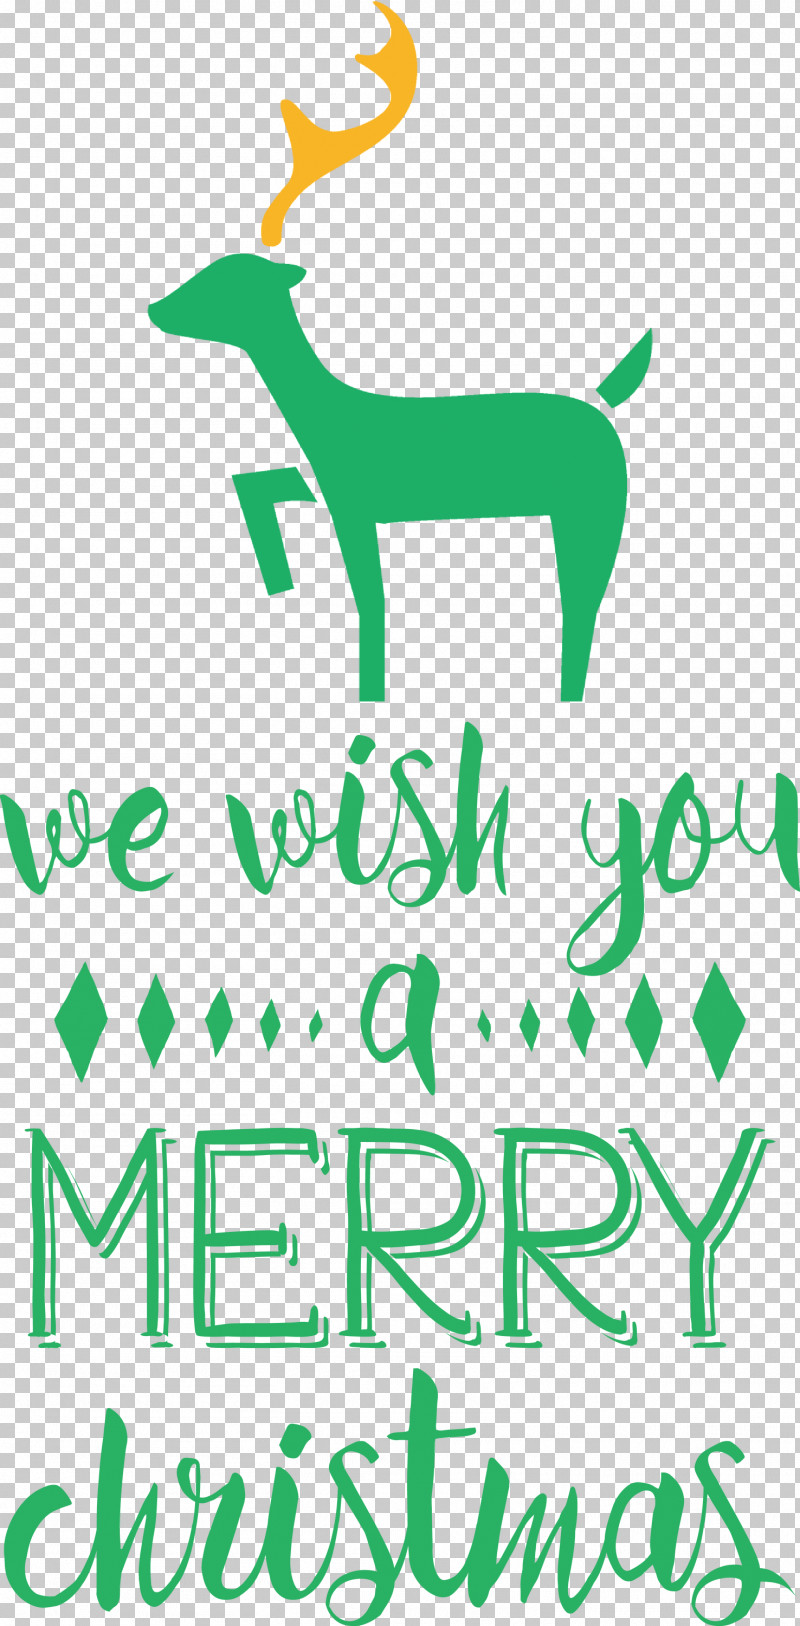 Merry Christmas Wish PNG, Clipart, Behavior, Green, Human, Leaf, Line Free PNG Download